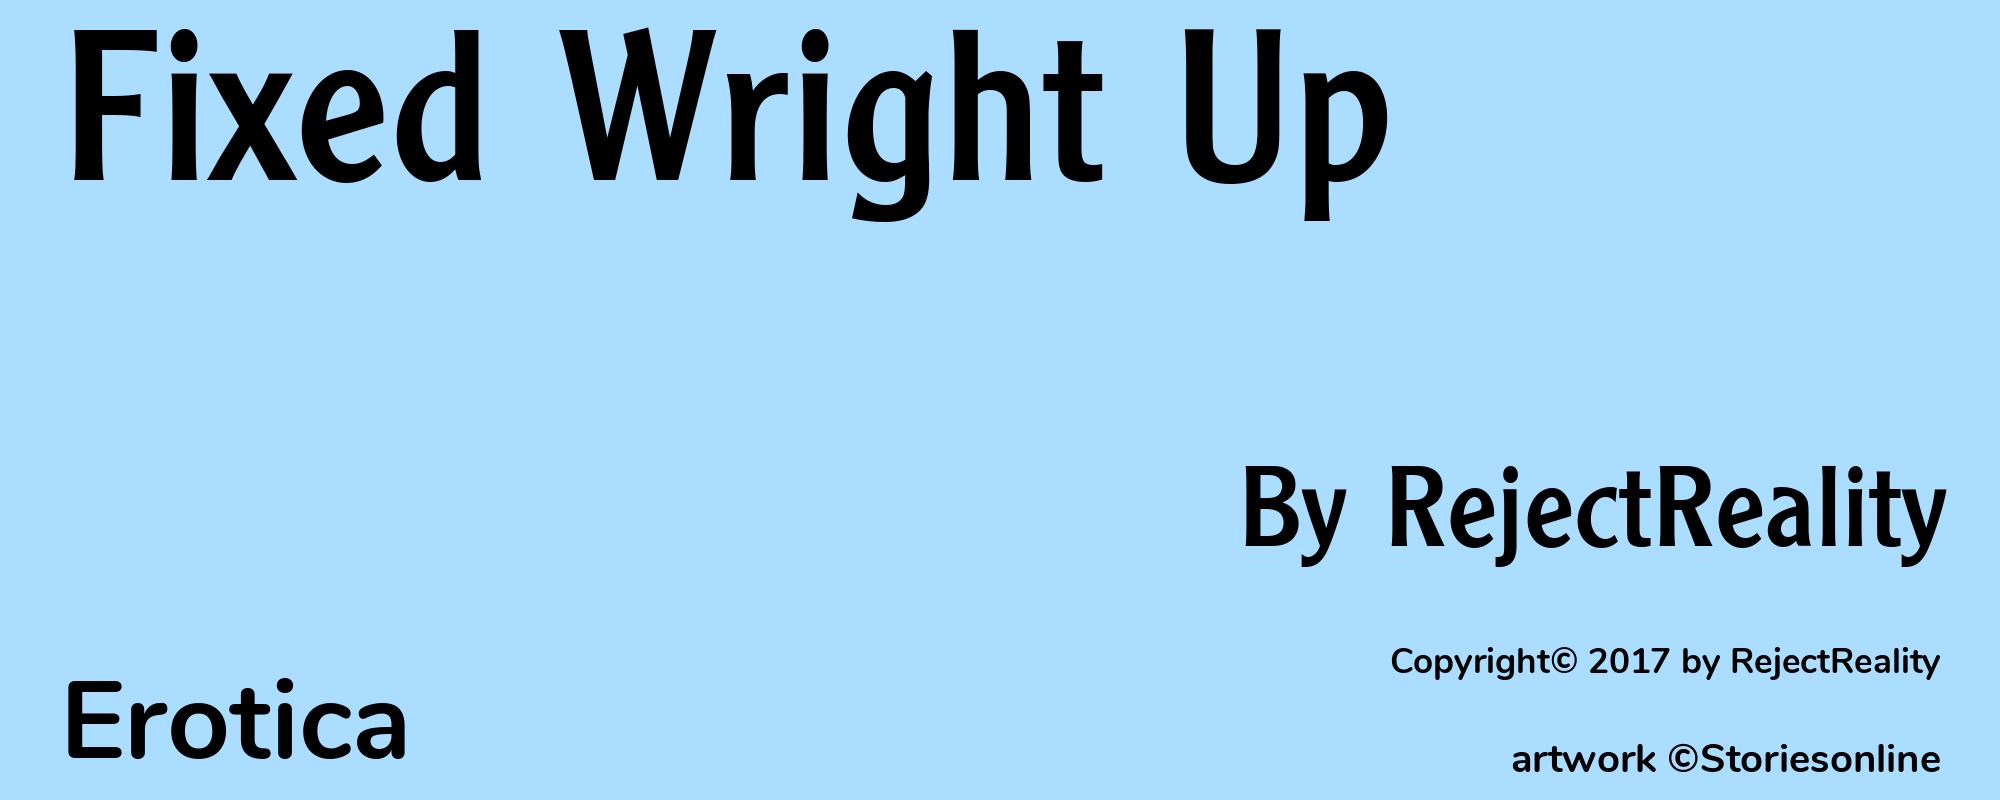 Fixed Wright Up - Cover